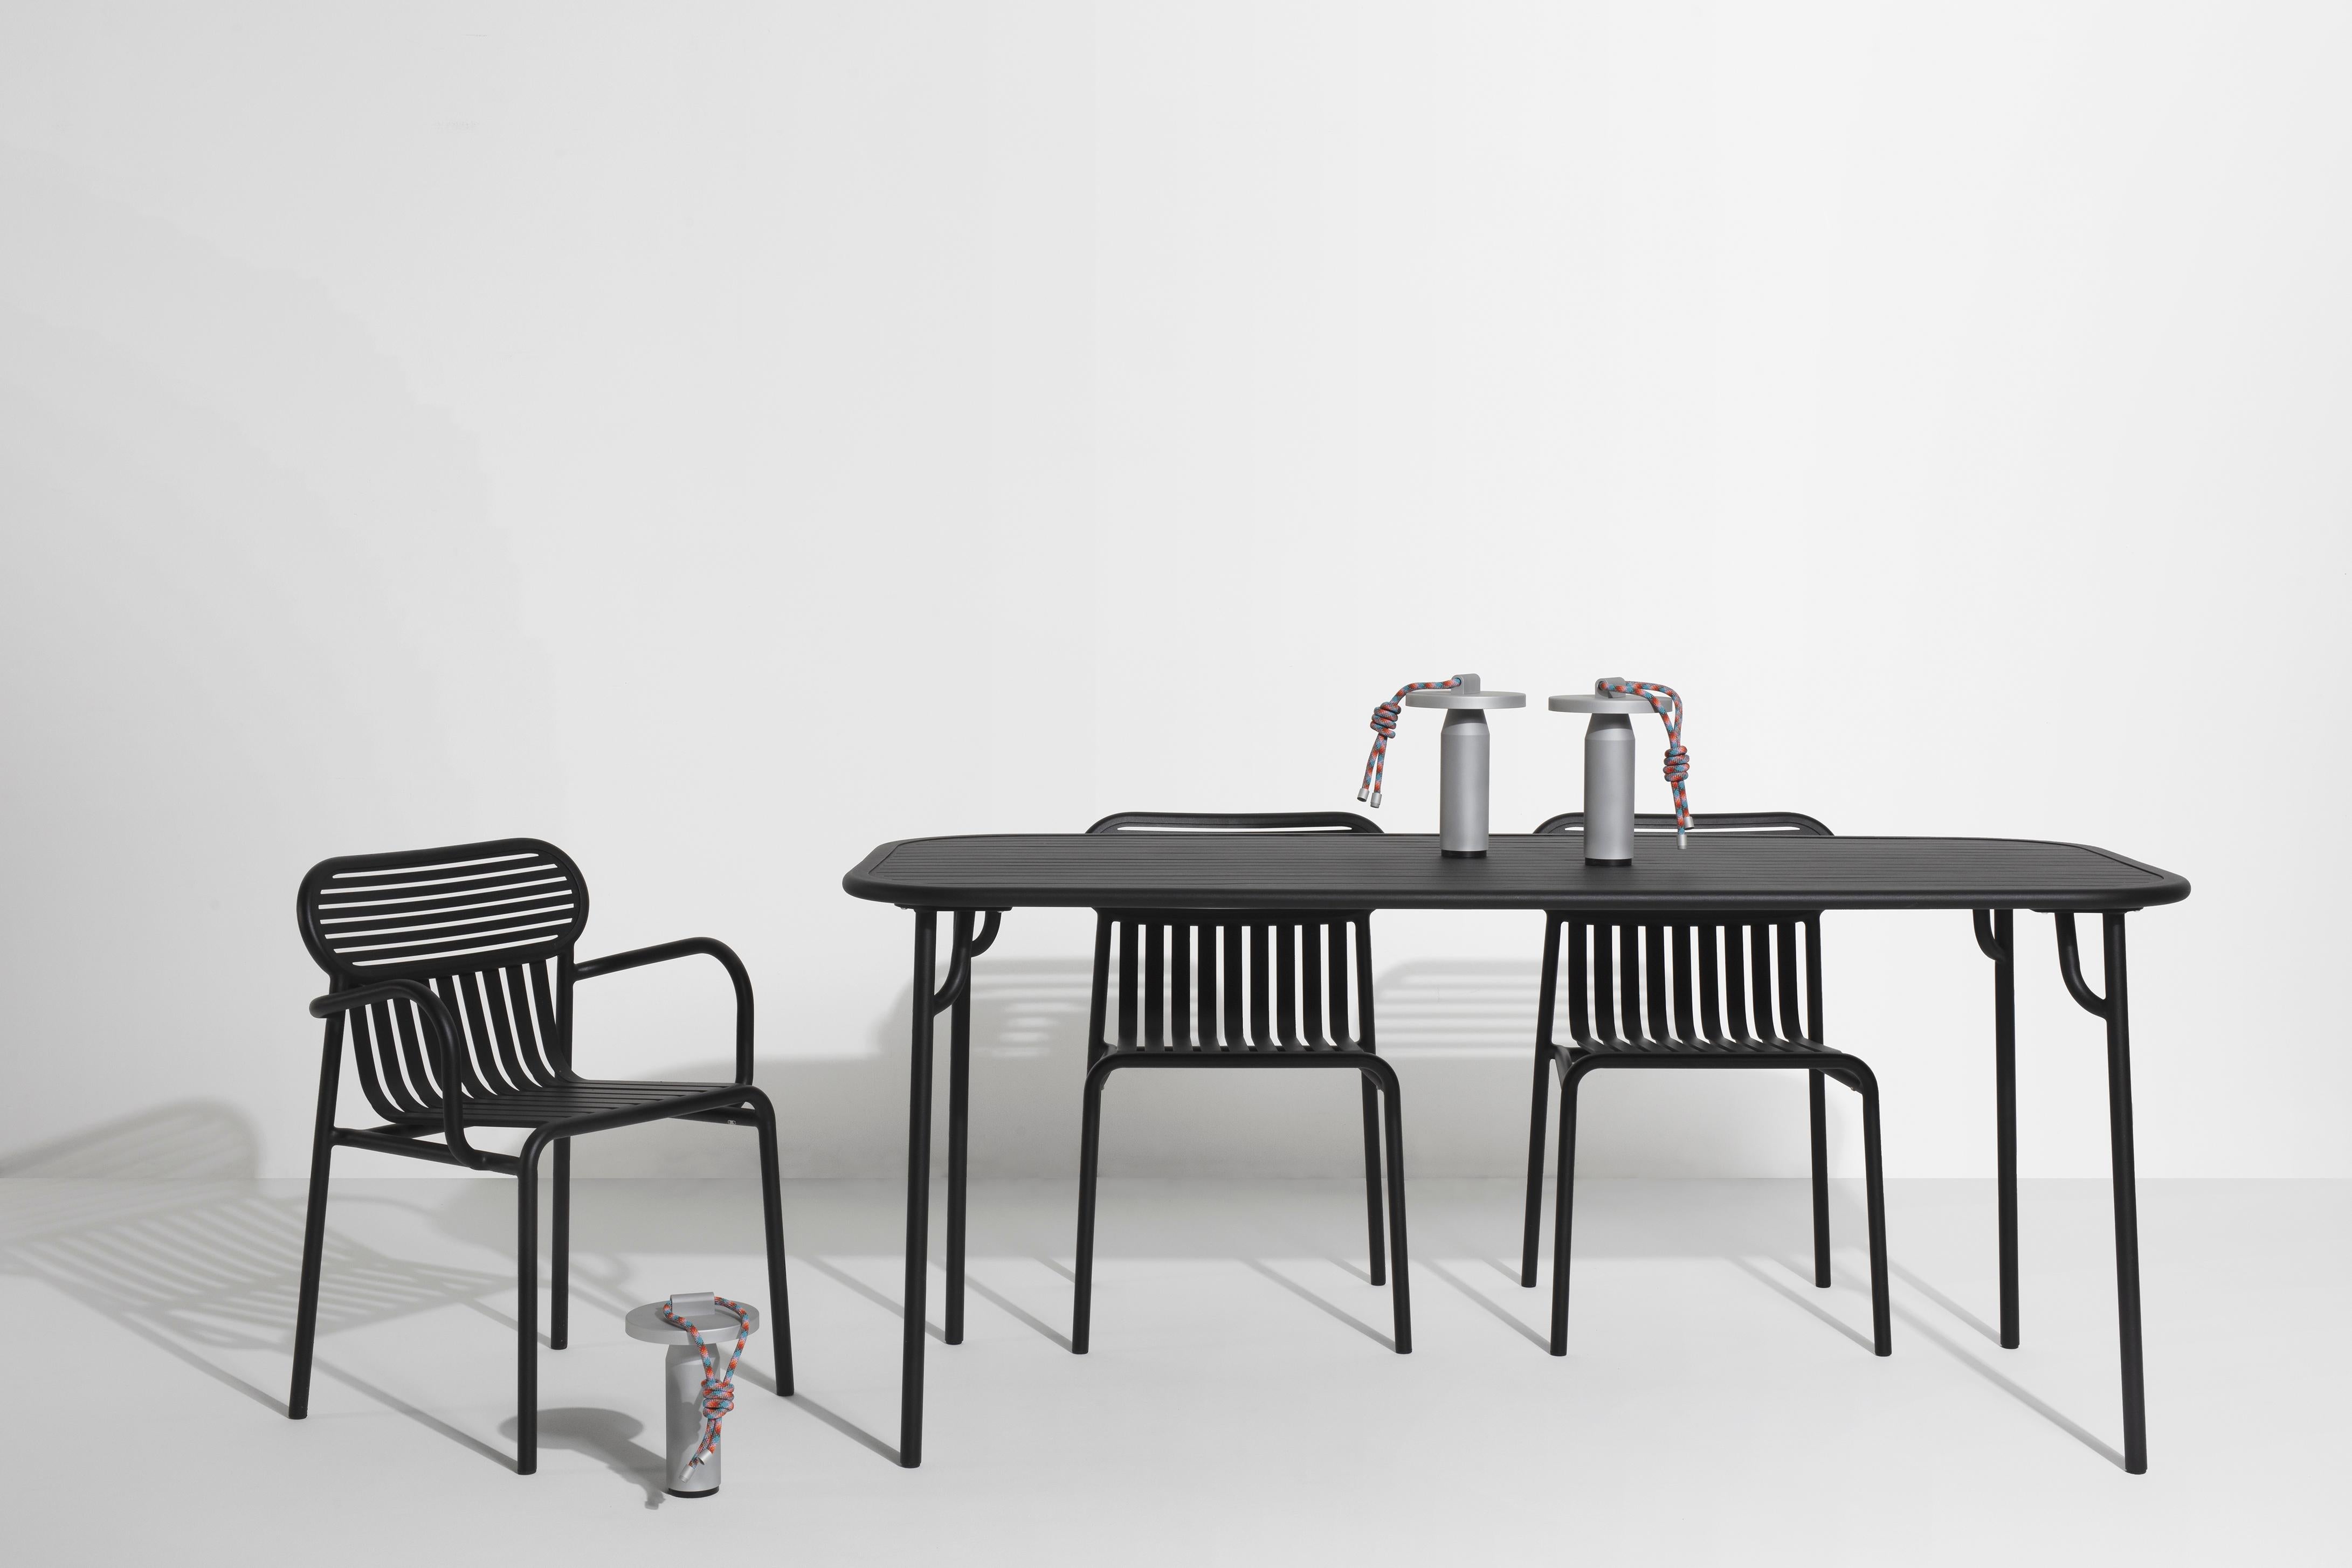 Aluminum Petite Friture Week-End Medium Rectangular Dining Table in Black with Slats For Sale